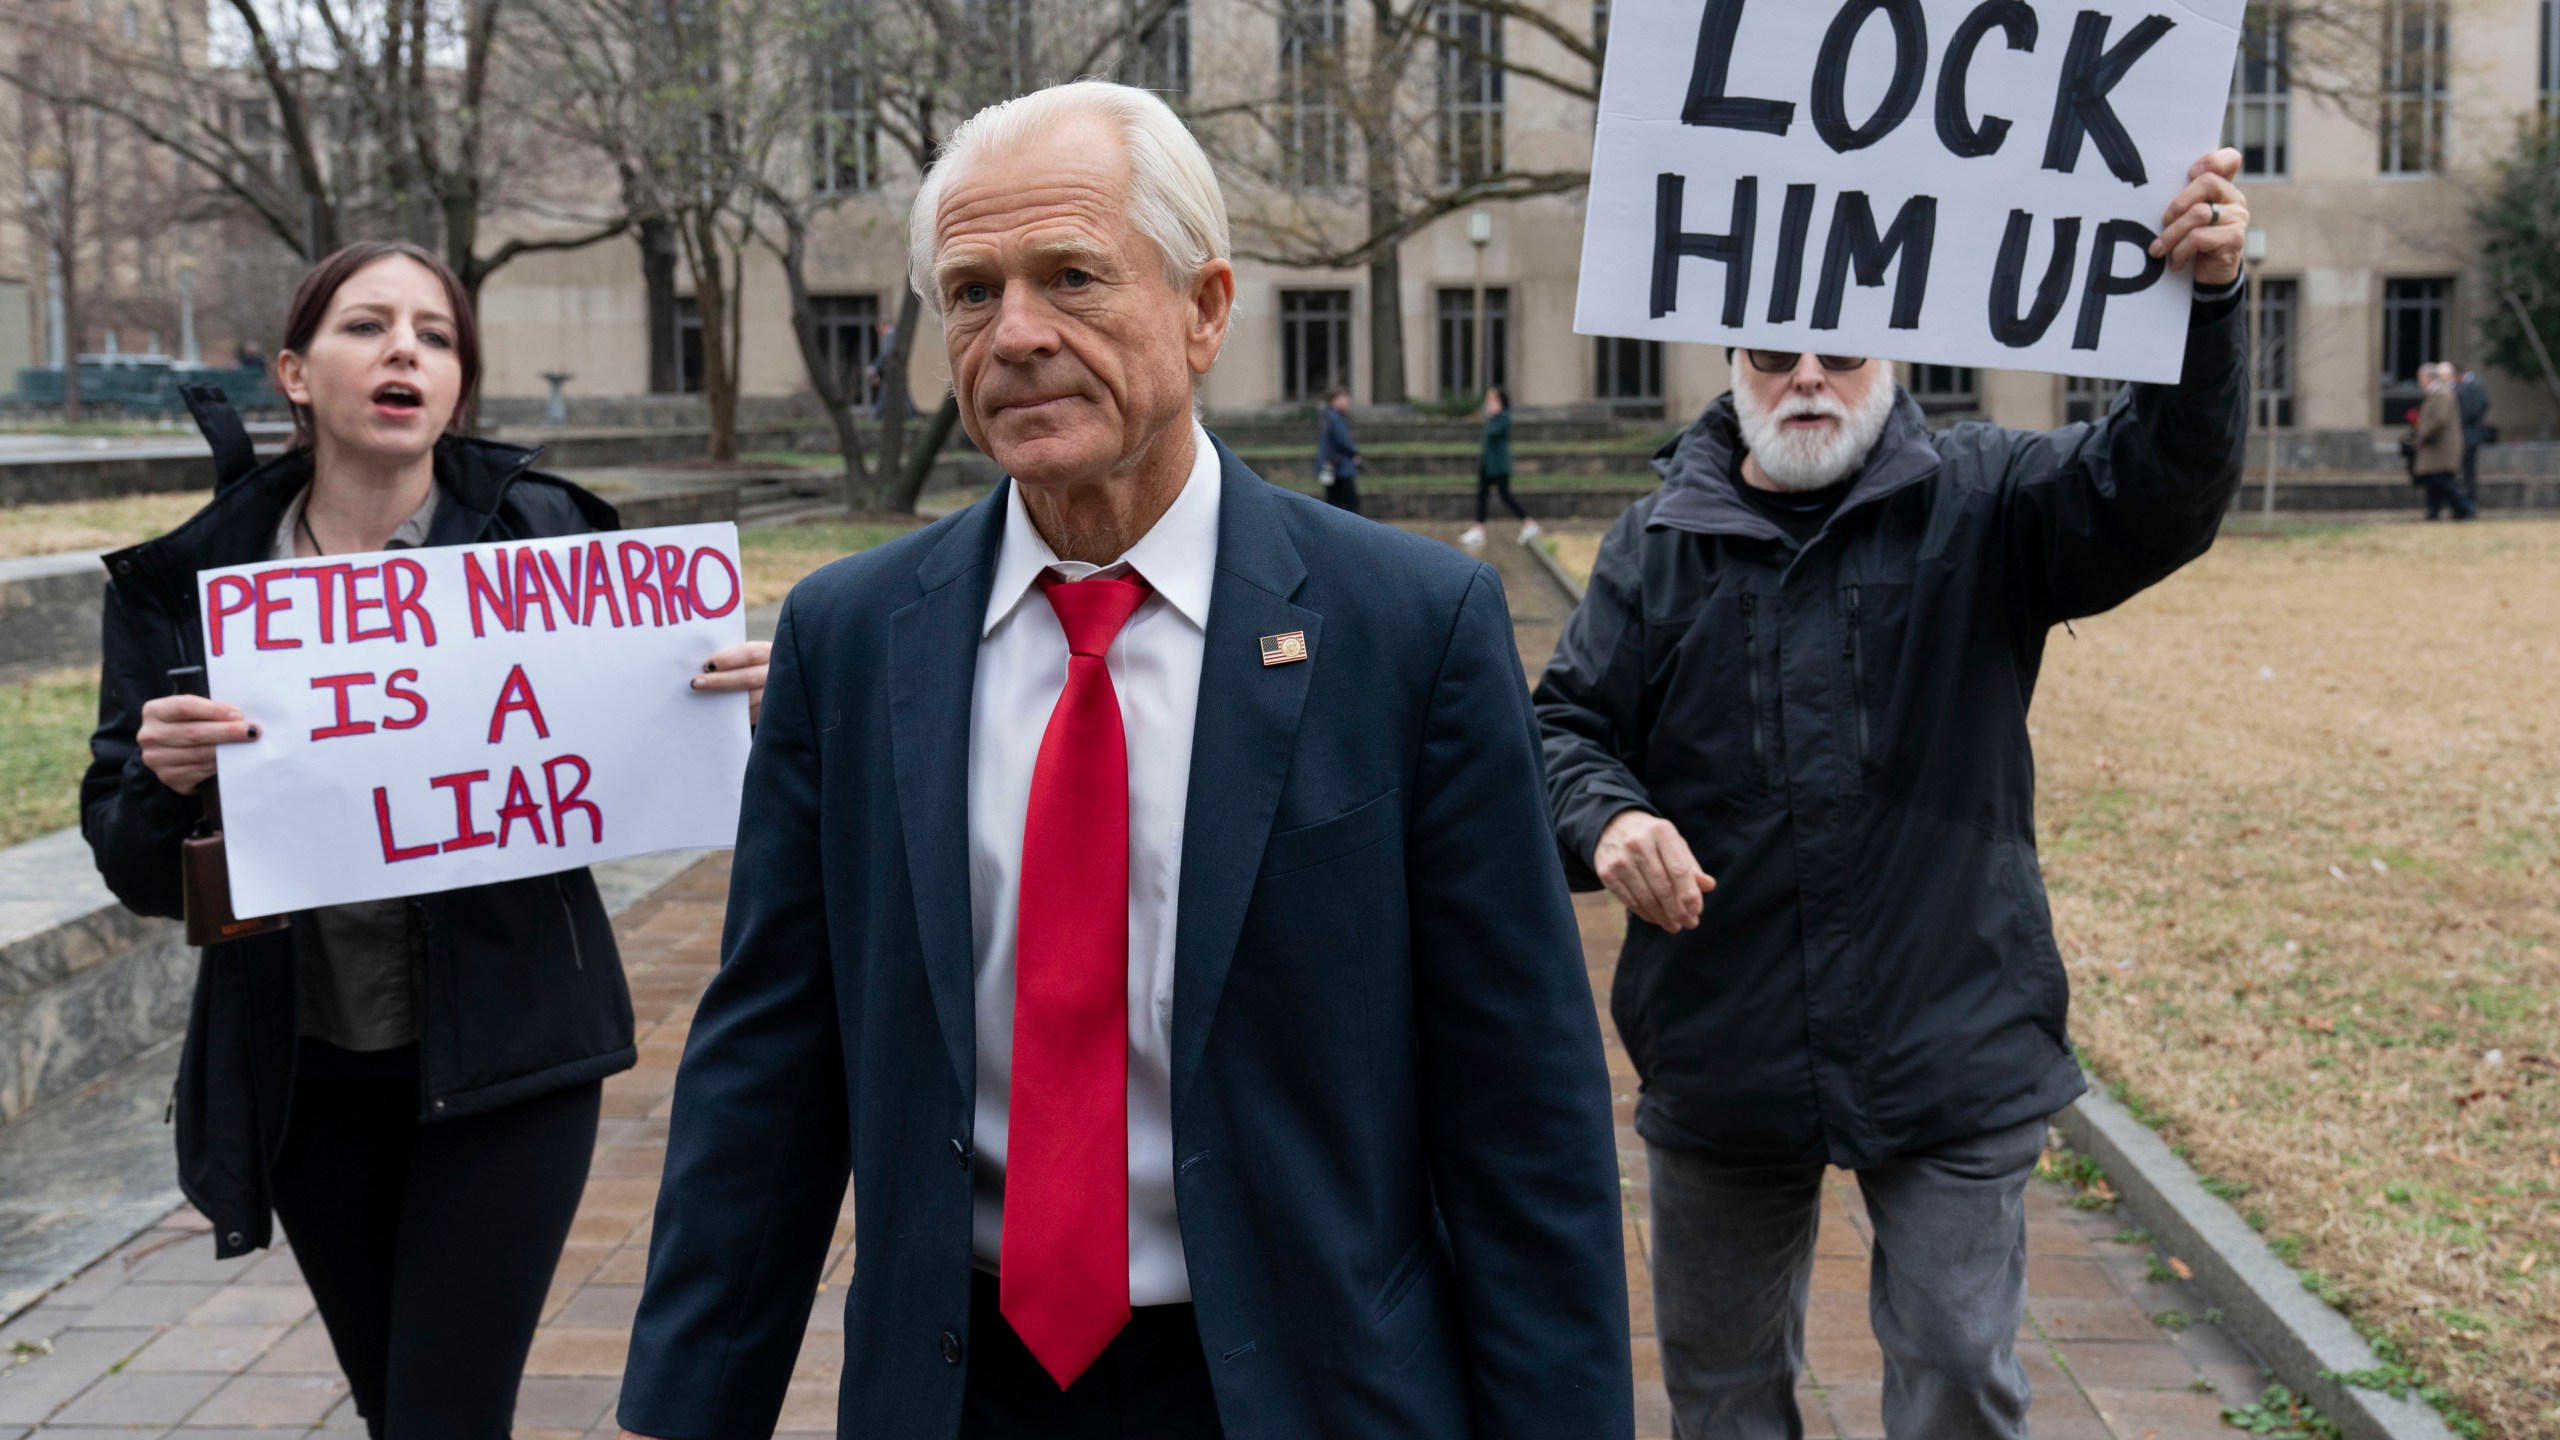 FILE - Former Trump White House official Peter Navarro, followed by demonstrators, leaves the U.S. Federal Courthouse in Washington, Jan. 25, 2024. An appeals court Thursday, March 14, denied Navarro’s bid to stave off his jail sentence on contempt of Congress charges for refusing to cooperate with a congressional investigation into the Jan. 6, 2021, attack on the U.S. Capitol. Navarro has been ordered to report to a federal prison by March 19. (AP Photo/Jose Luis Magana, File)